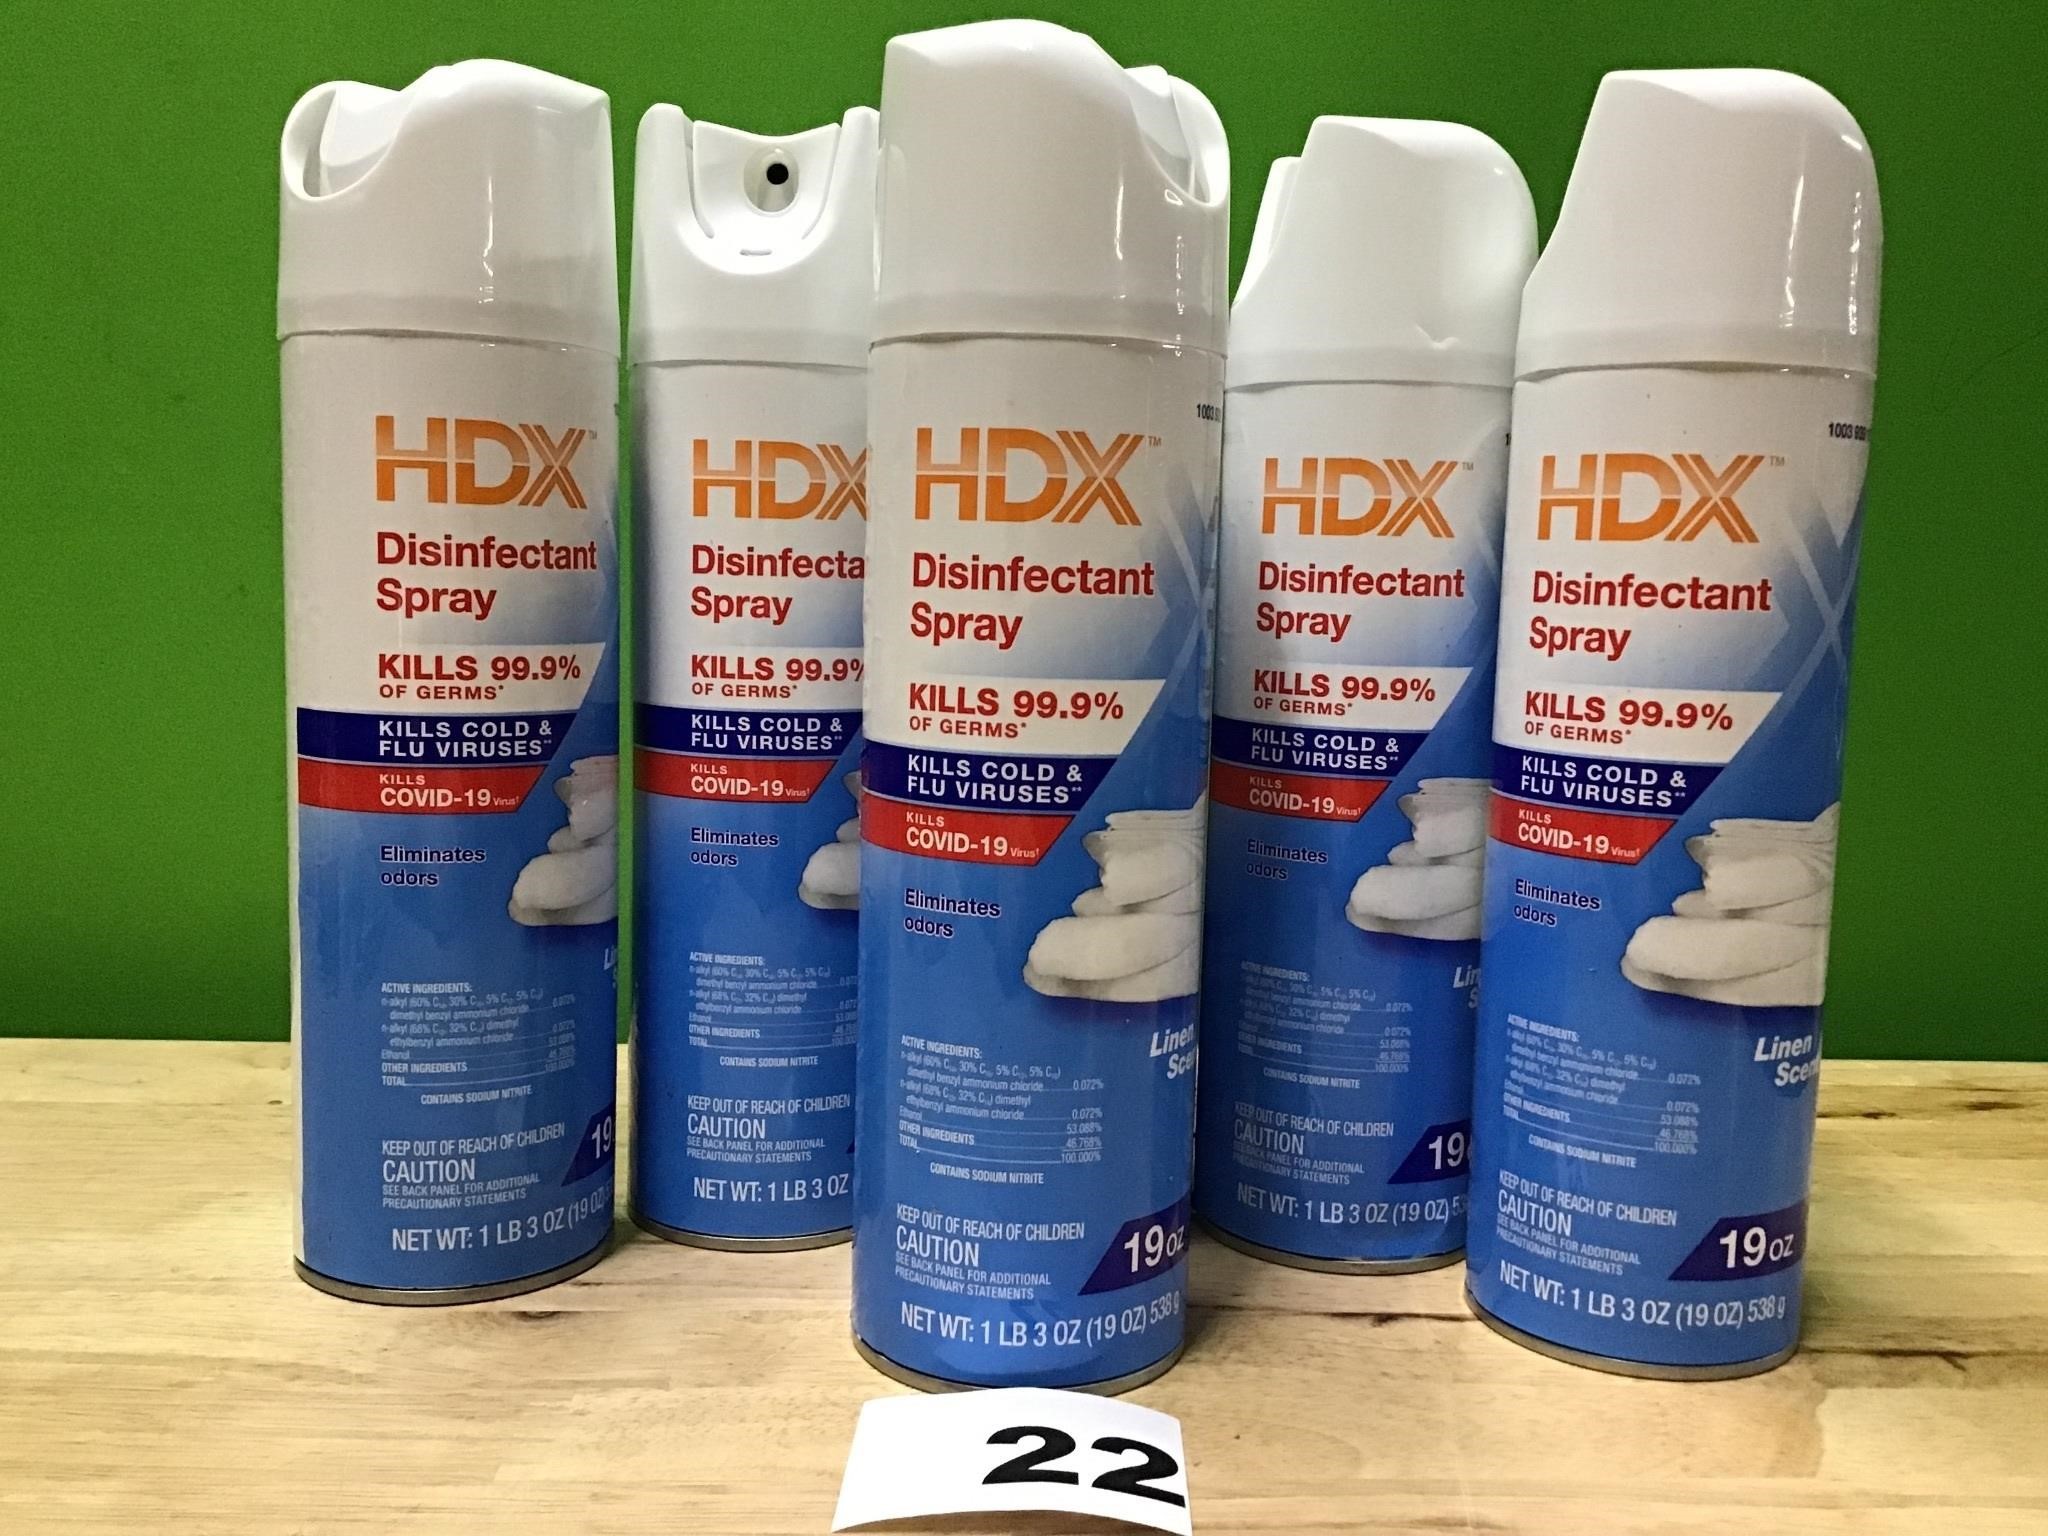 HDX Disinfectant Spray lot of 6